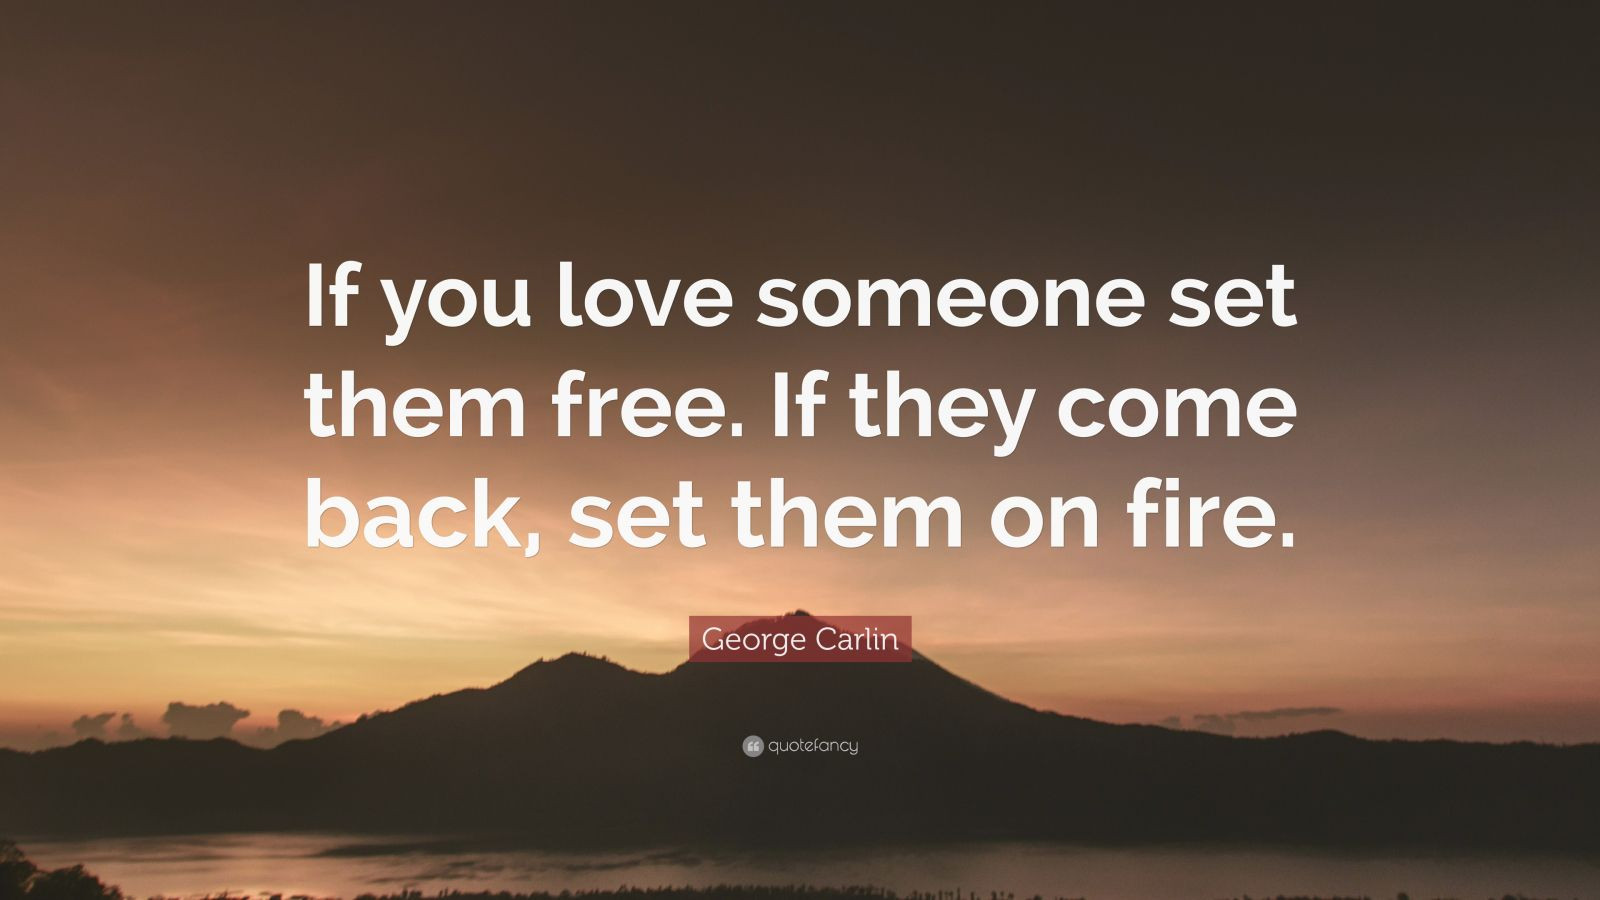 If You Love Someone Set Them Free Quote
 George Carlin Quote “If you love someone set them free